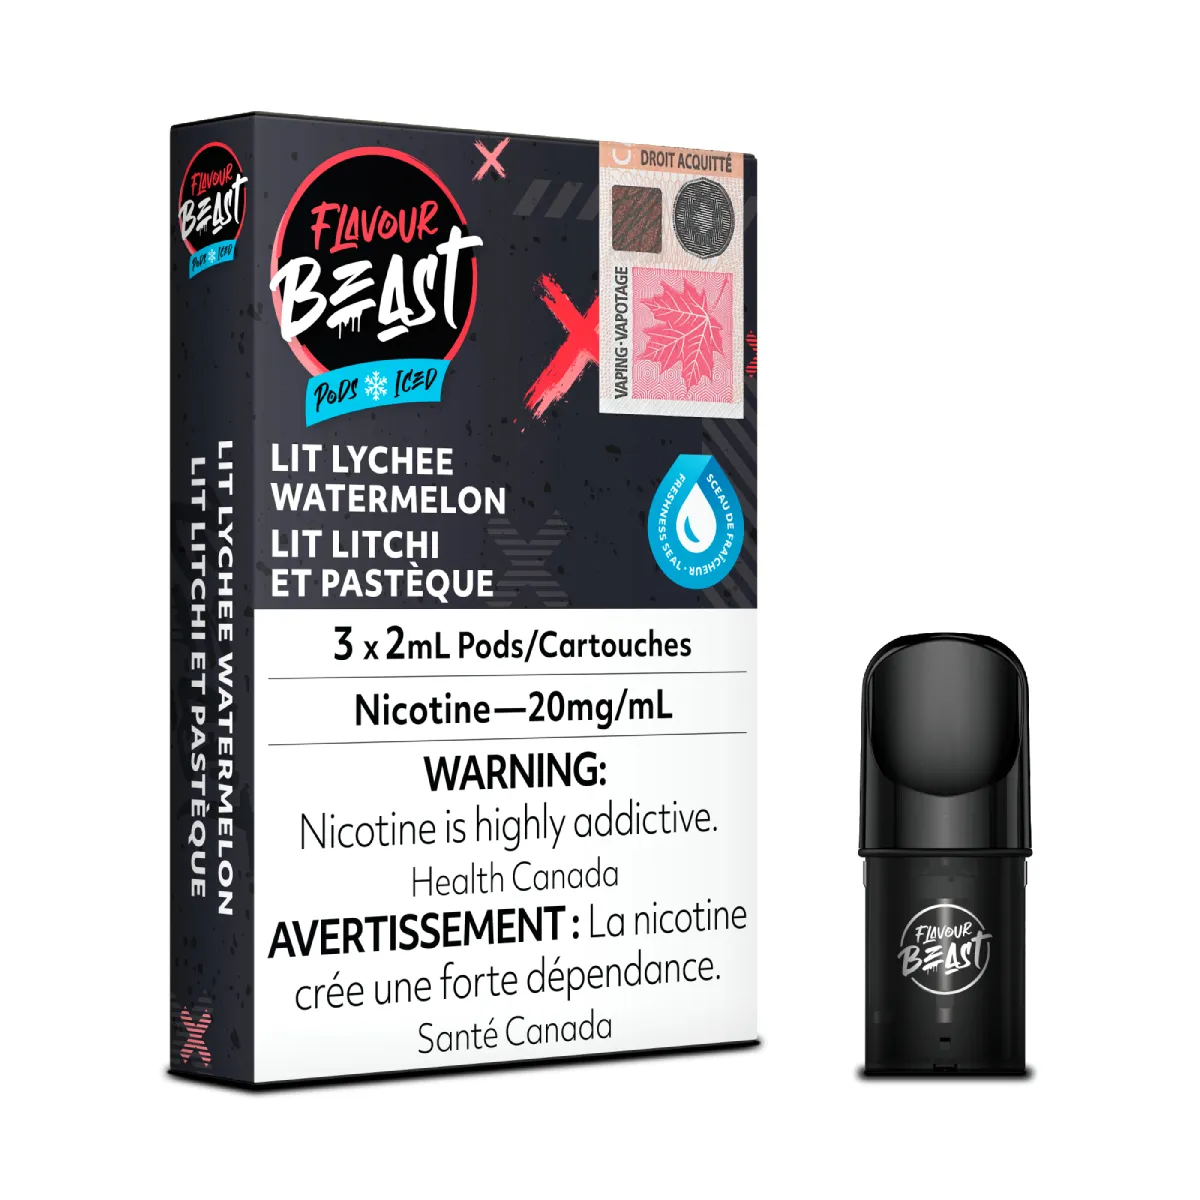 Flavour Beast Pods - Lit Lychee Watermelon Iced (3Pk)